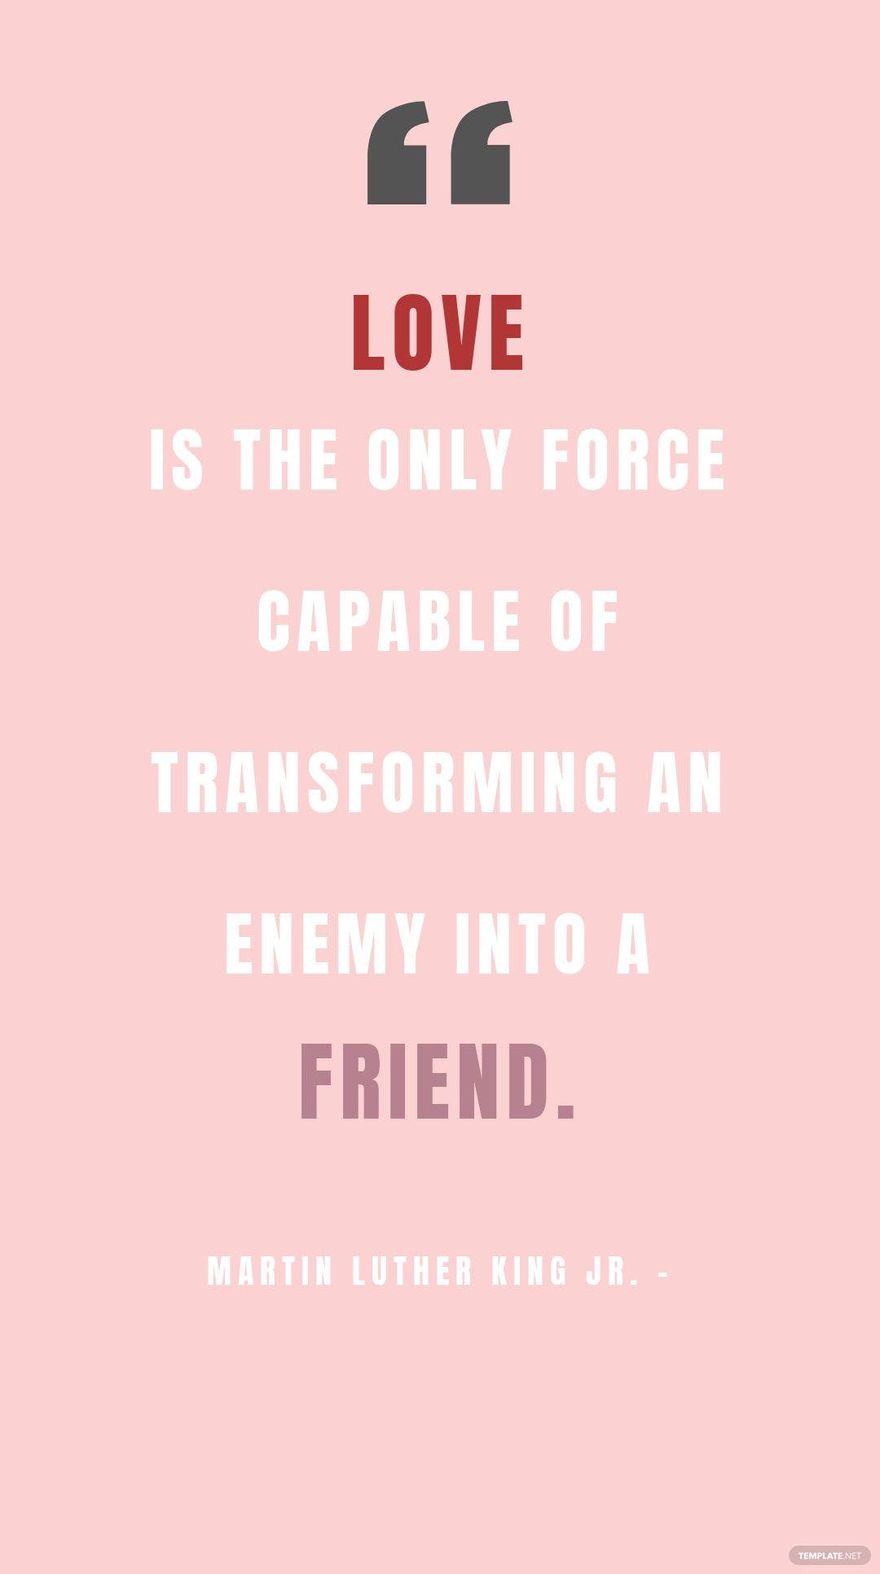 Free Martin Luther King Jr. - Love is the only force capable of transforming an enemy into a friend.